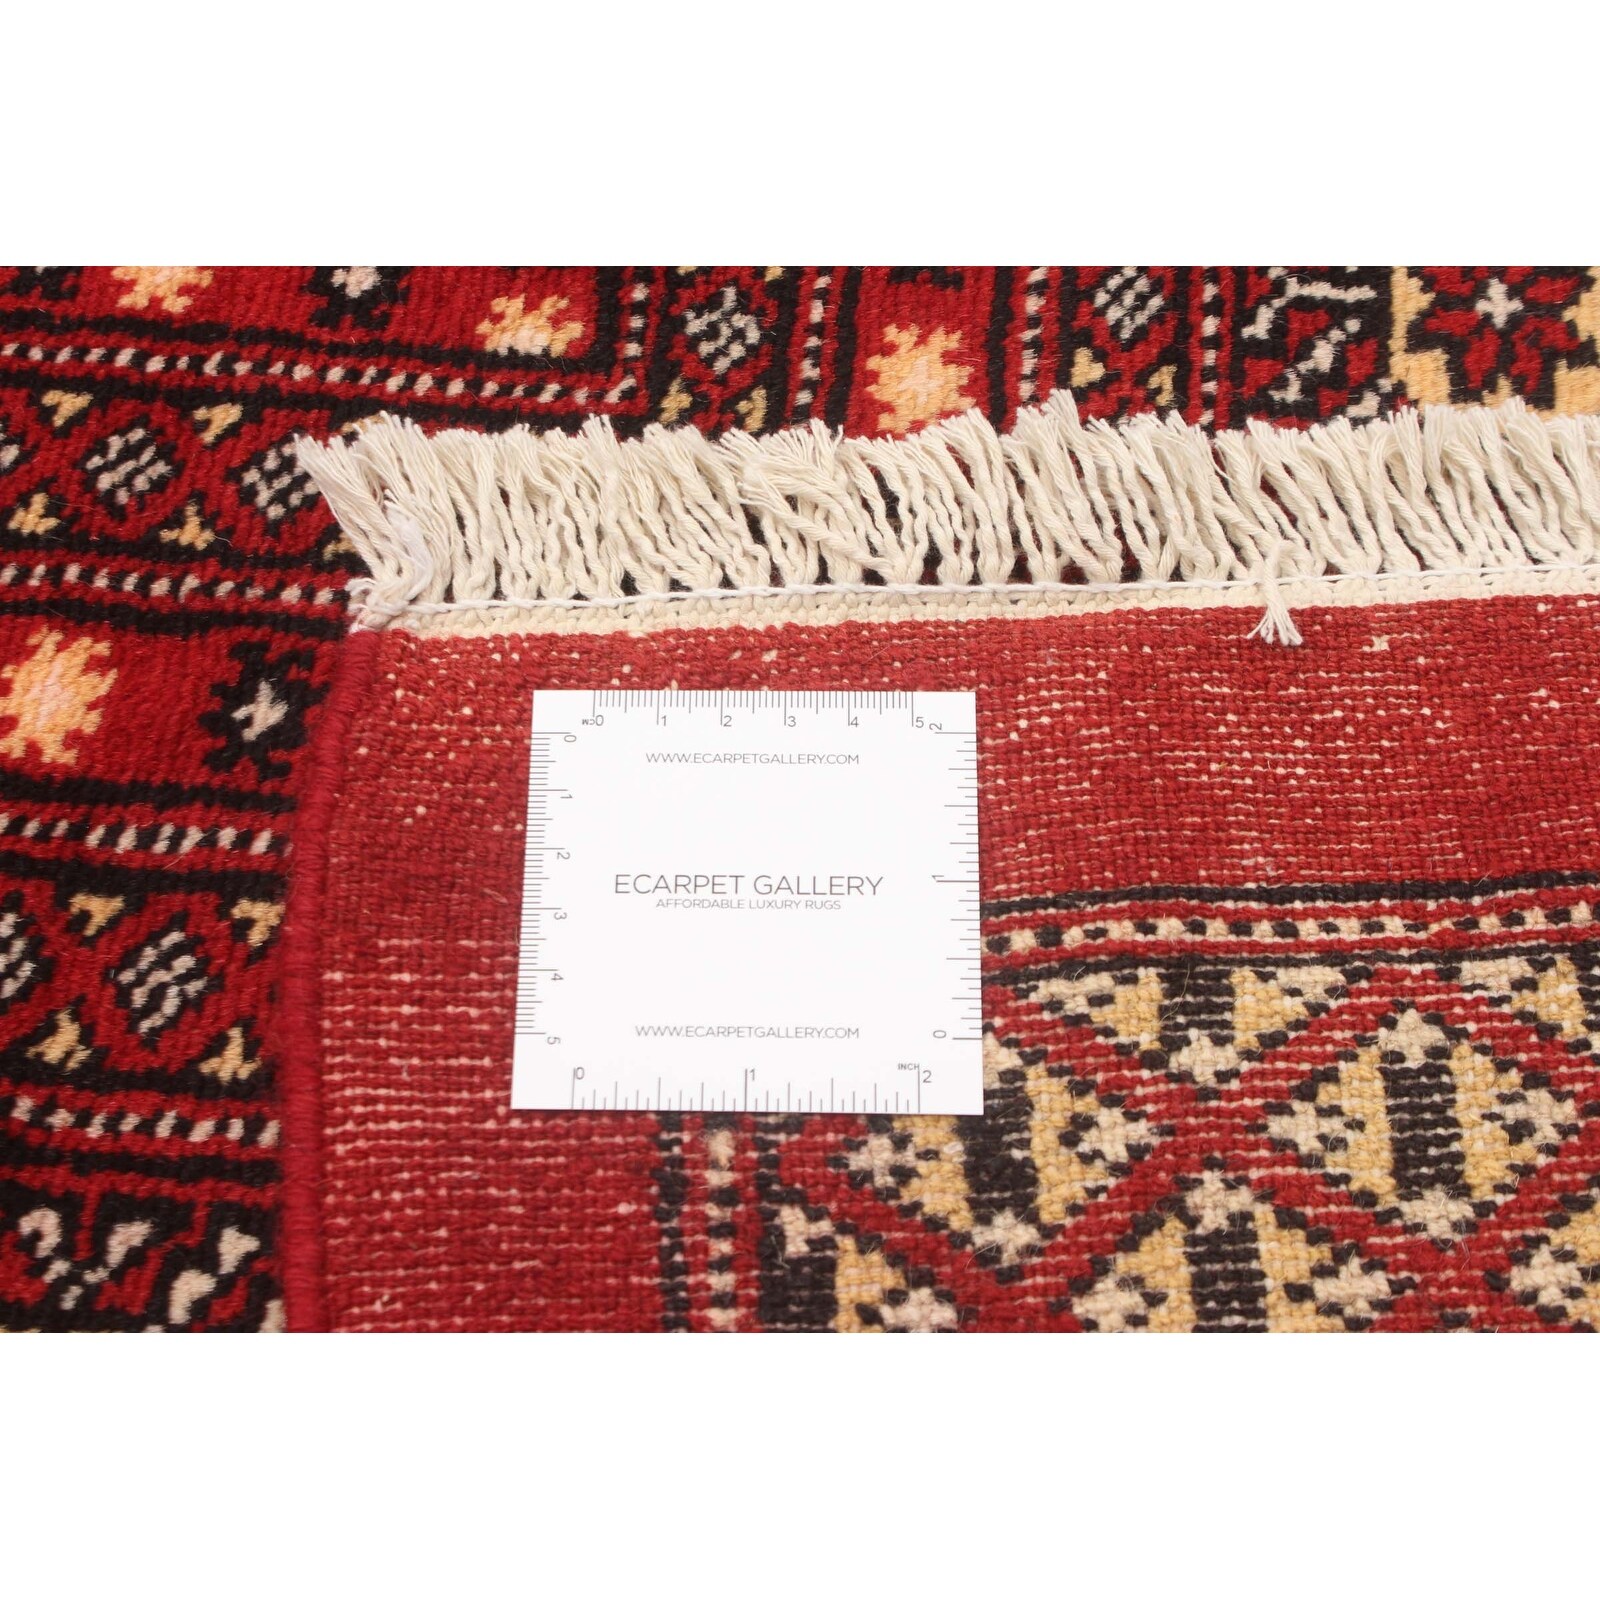 Bedroom Hand-Knotted Wool Rug Finest Peshawar Bokhara Bordered Red Rug 8'11 x 12'0 eCarpet Gallery Large Area Rug for Living Room 363161 